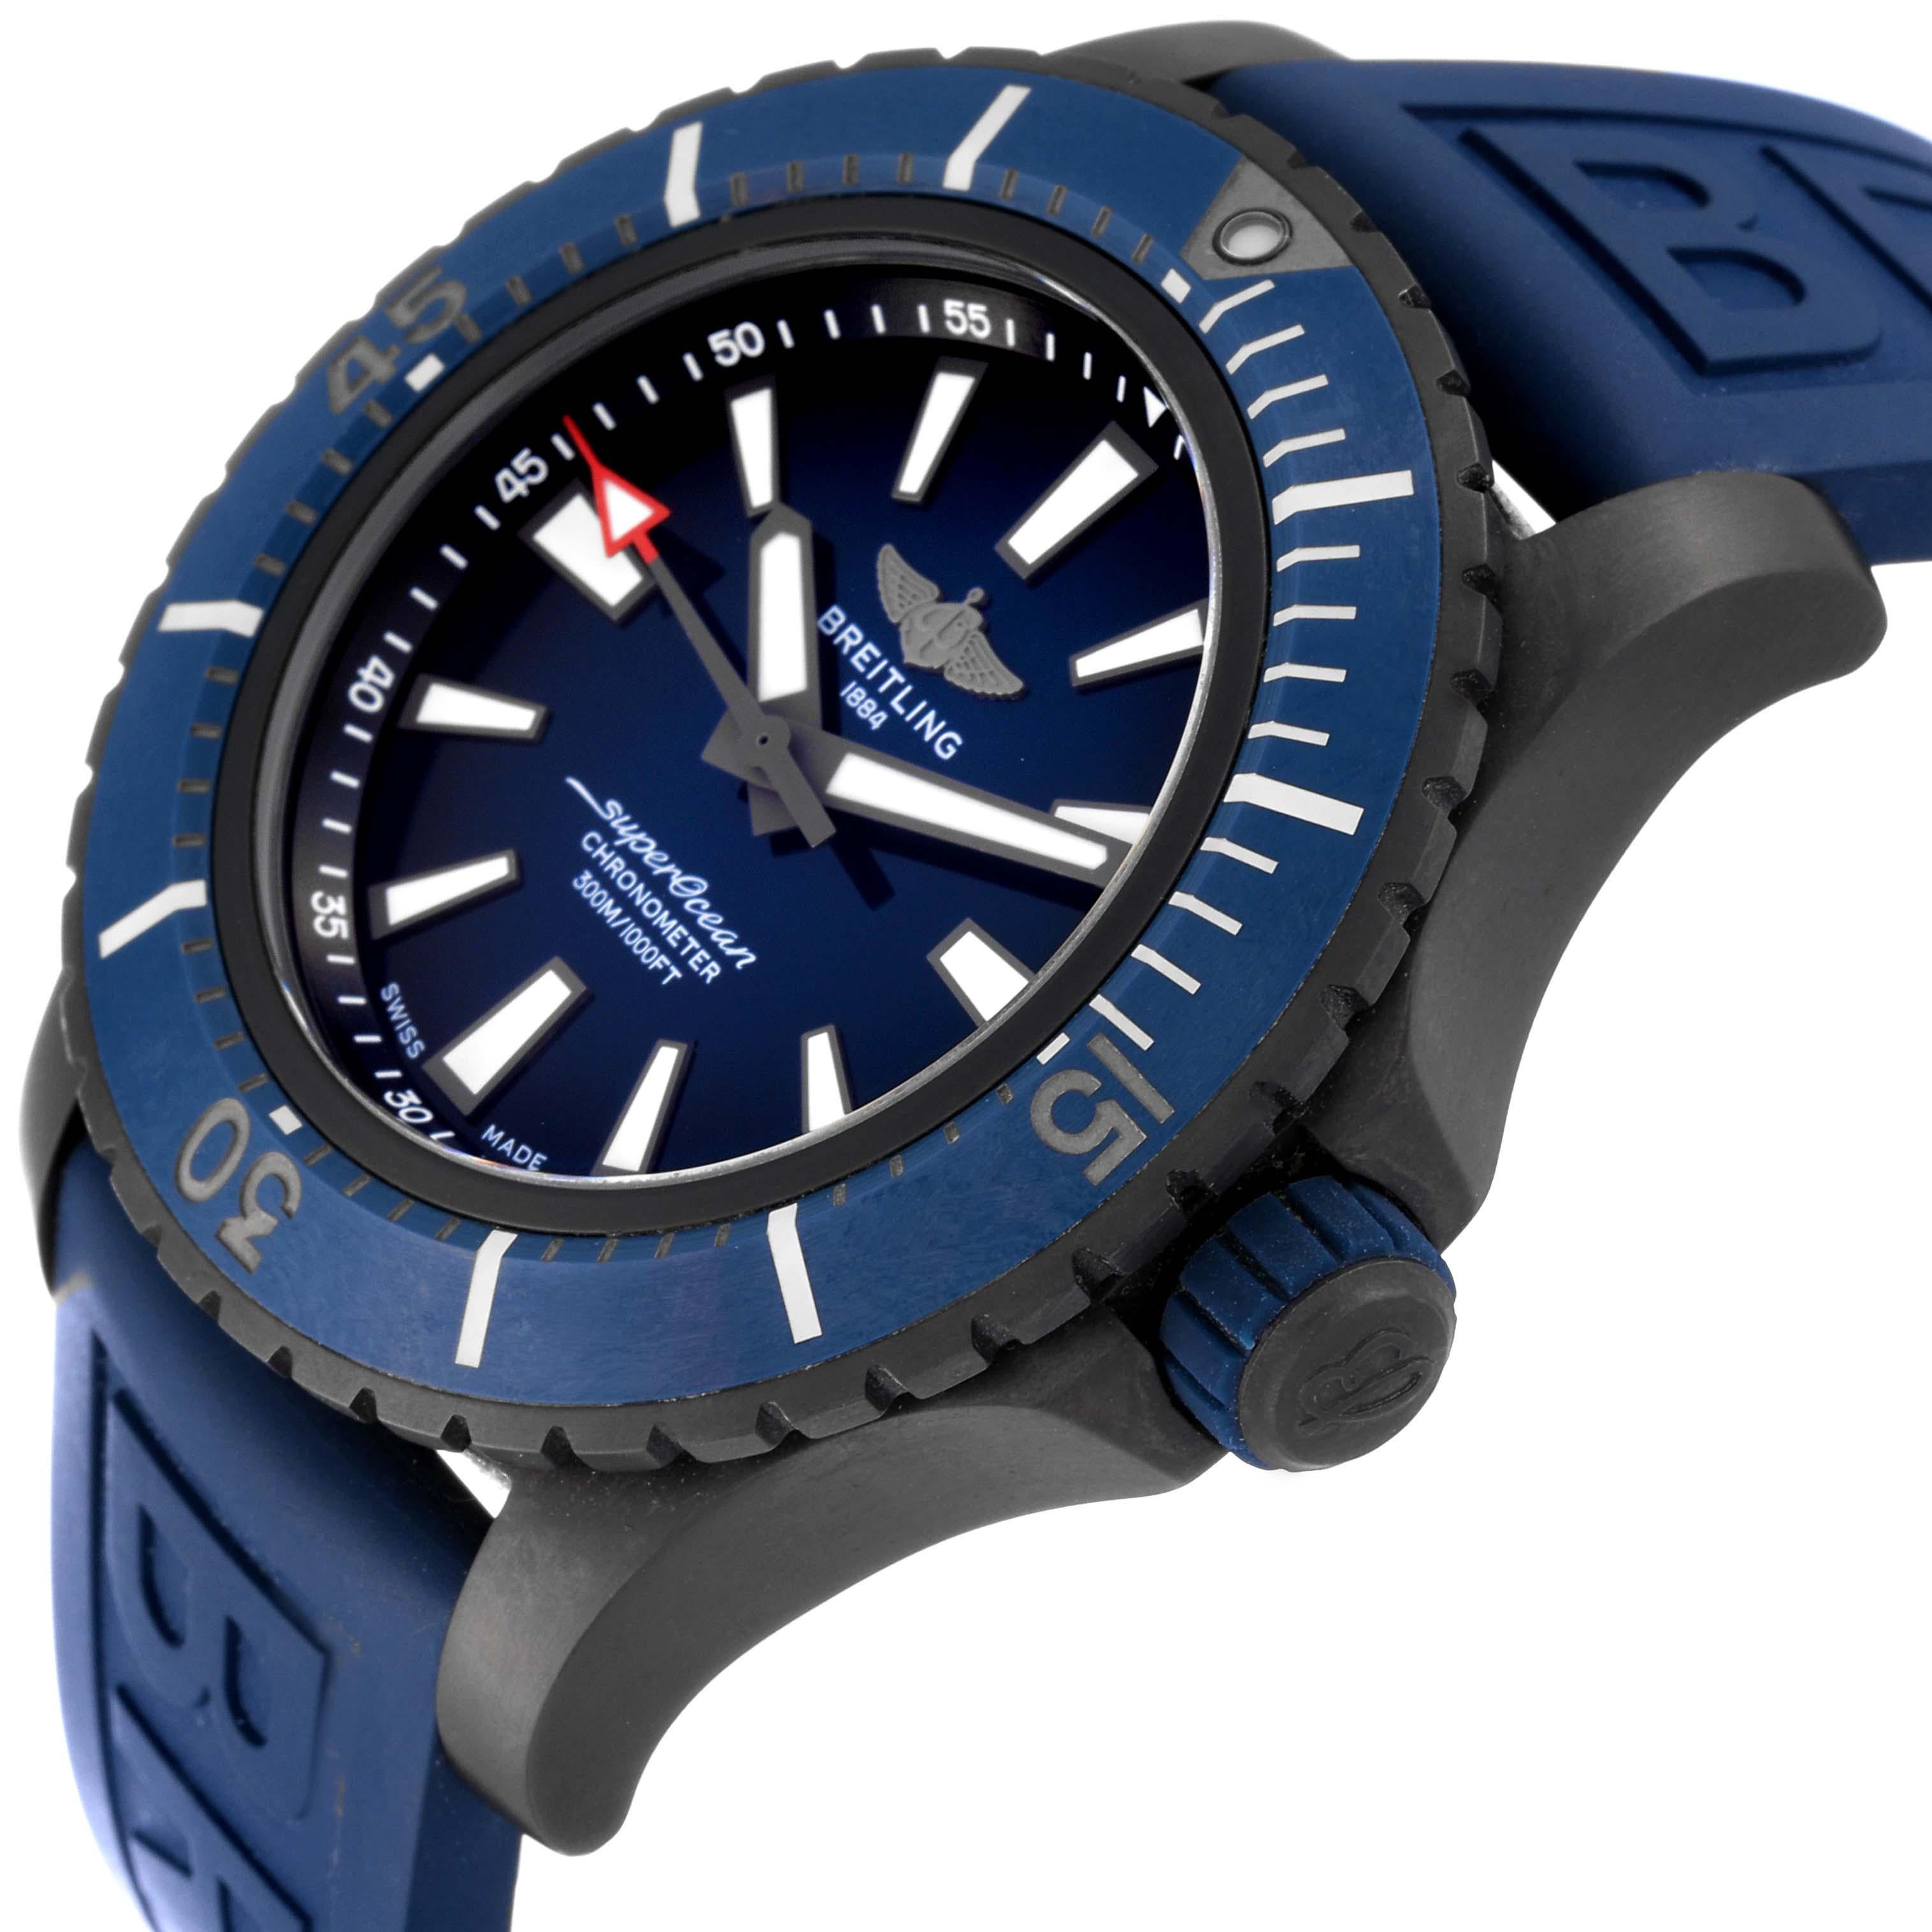 Breitling Superocean 48 Blue Dial Titanium Mens Watch V17369 Box Card. Automatic self-winding movement. DLC coated titanium case 48.0 mm in diameter. Rubberized screw down crown. DLC Coated Titanium bidirectional rotating bezel with locking